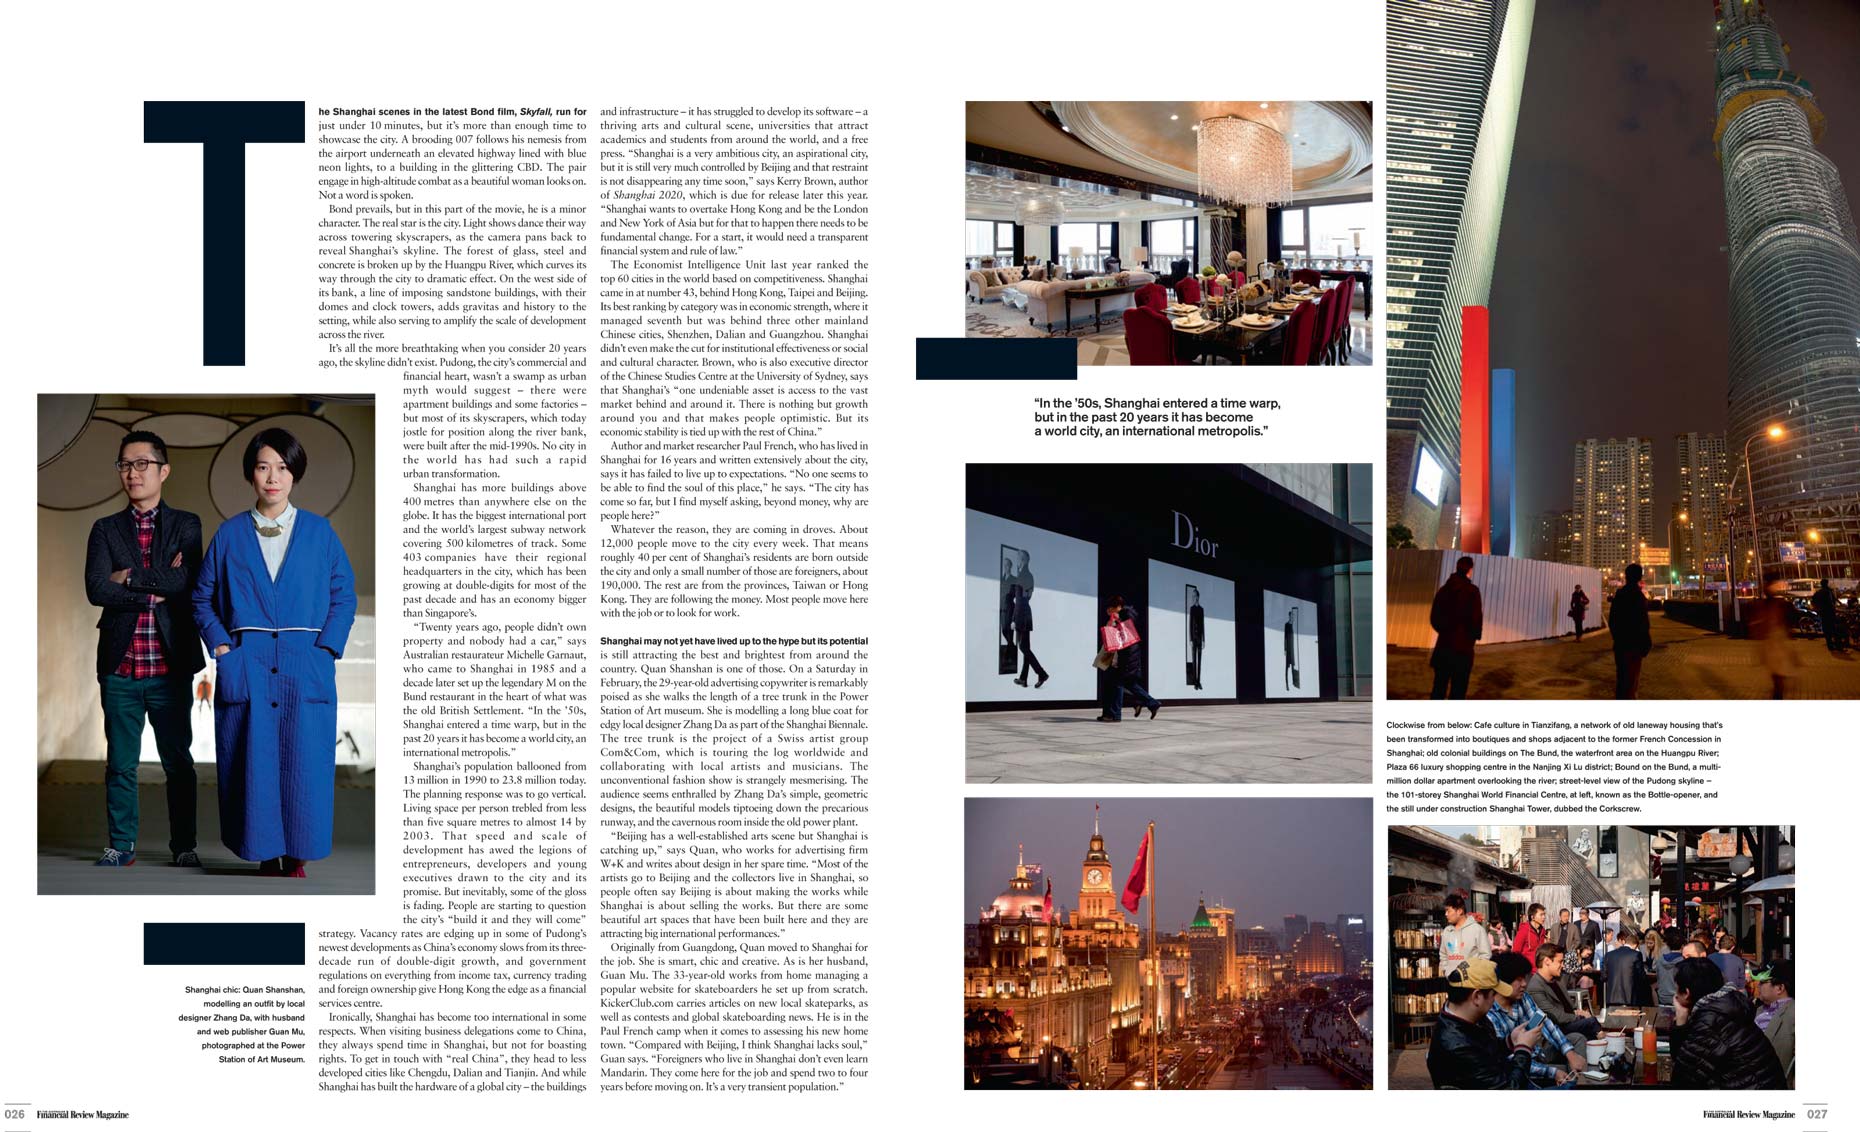 The Australian Financial Review Magazine - Shanghai City Without a Soul - 28June 2013 page 2-3